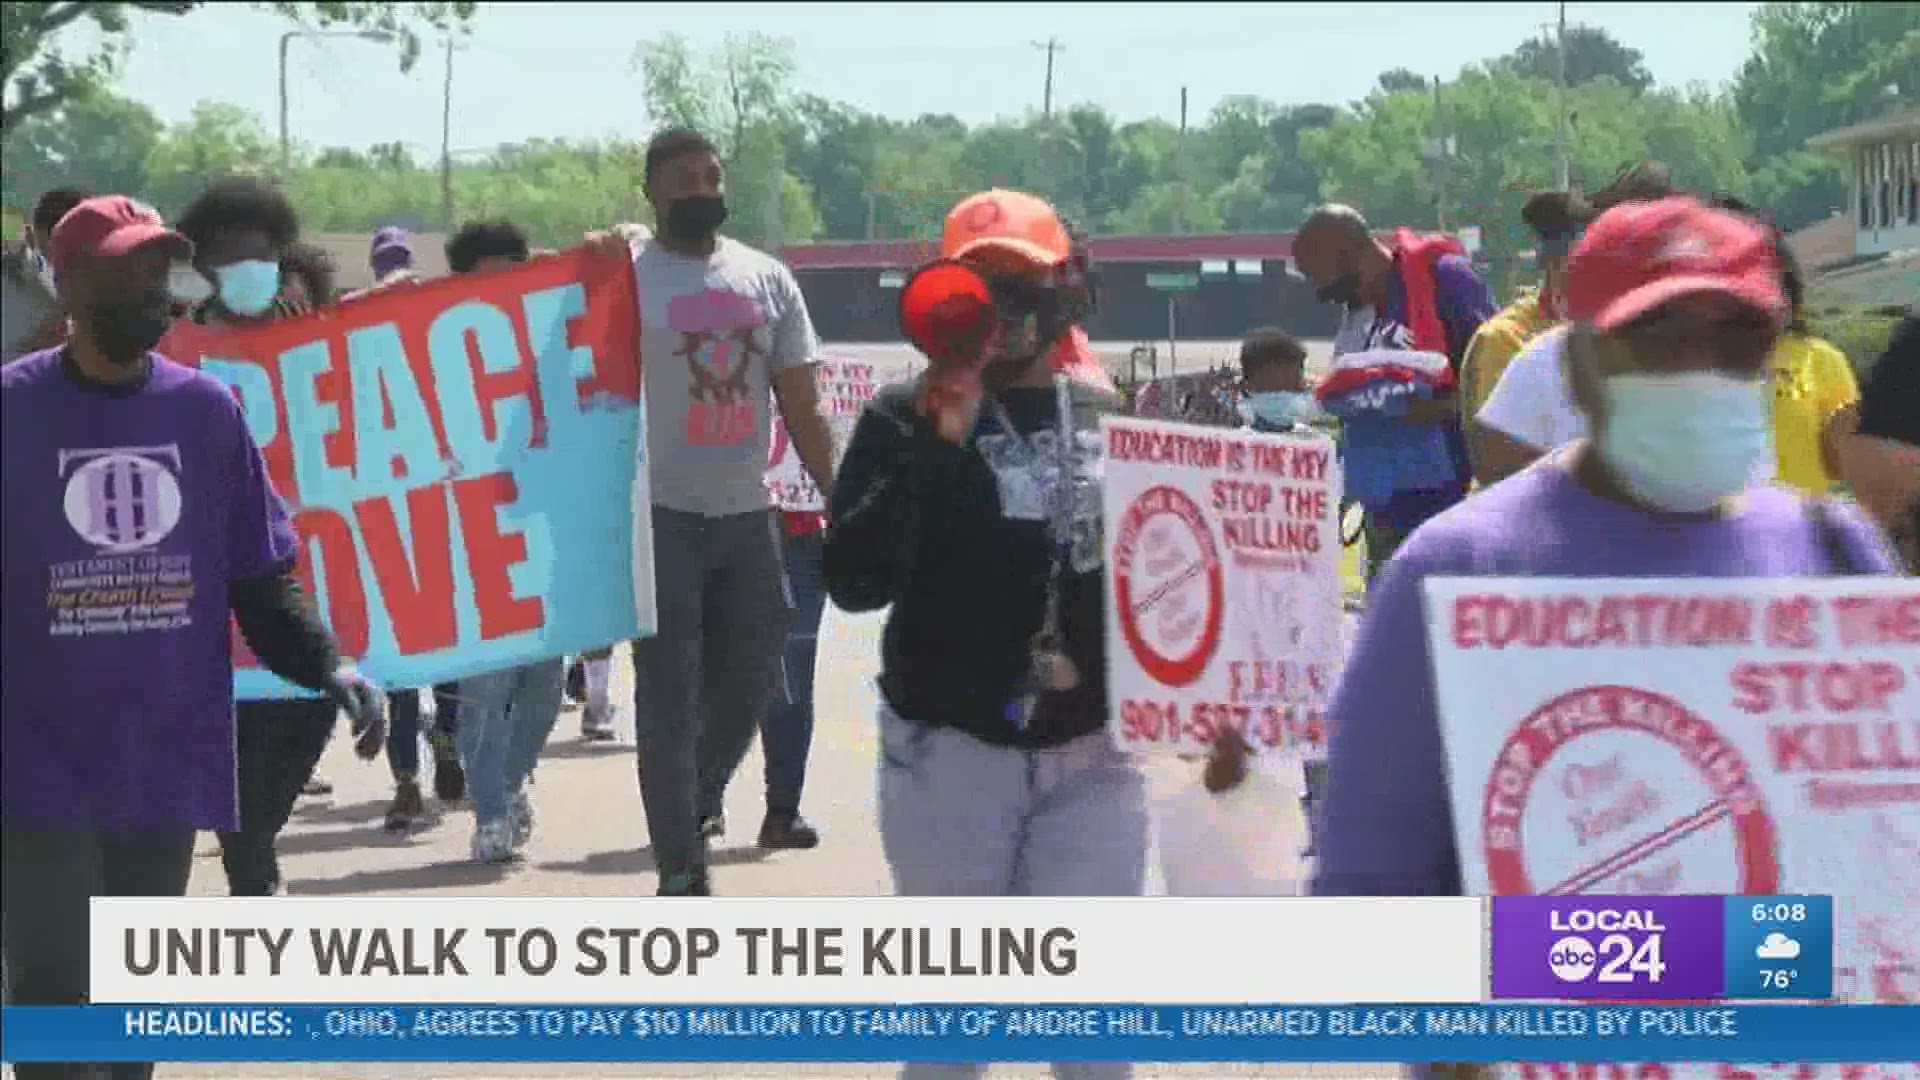 People fed up with violence took the streets of Frayser in a unity walk Saturday morning